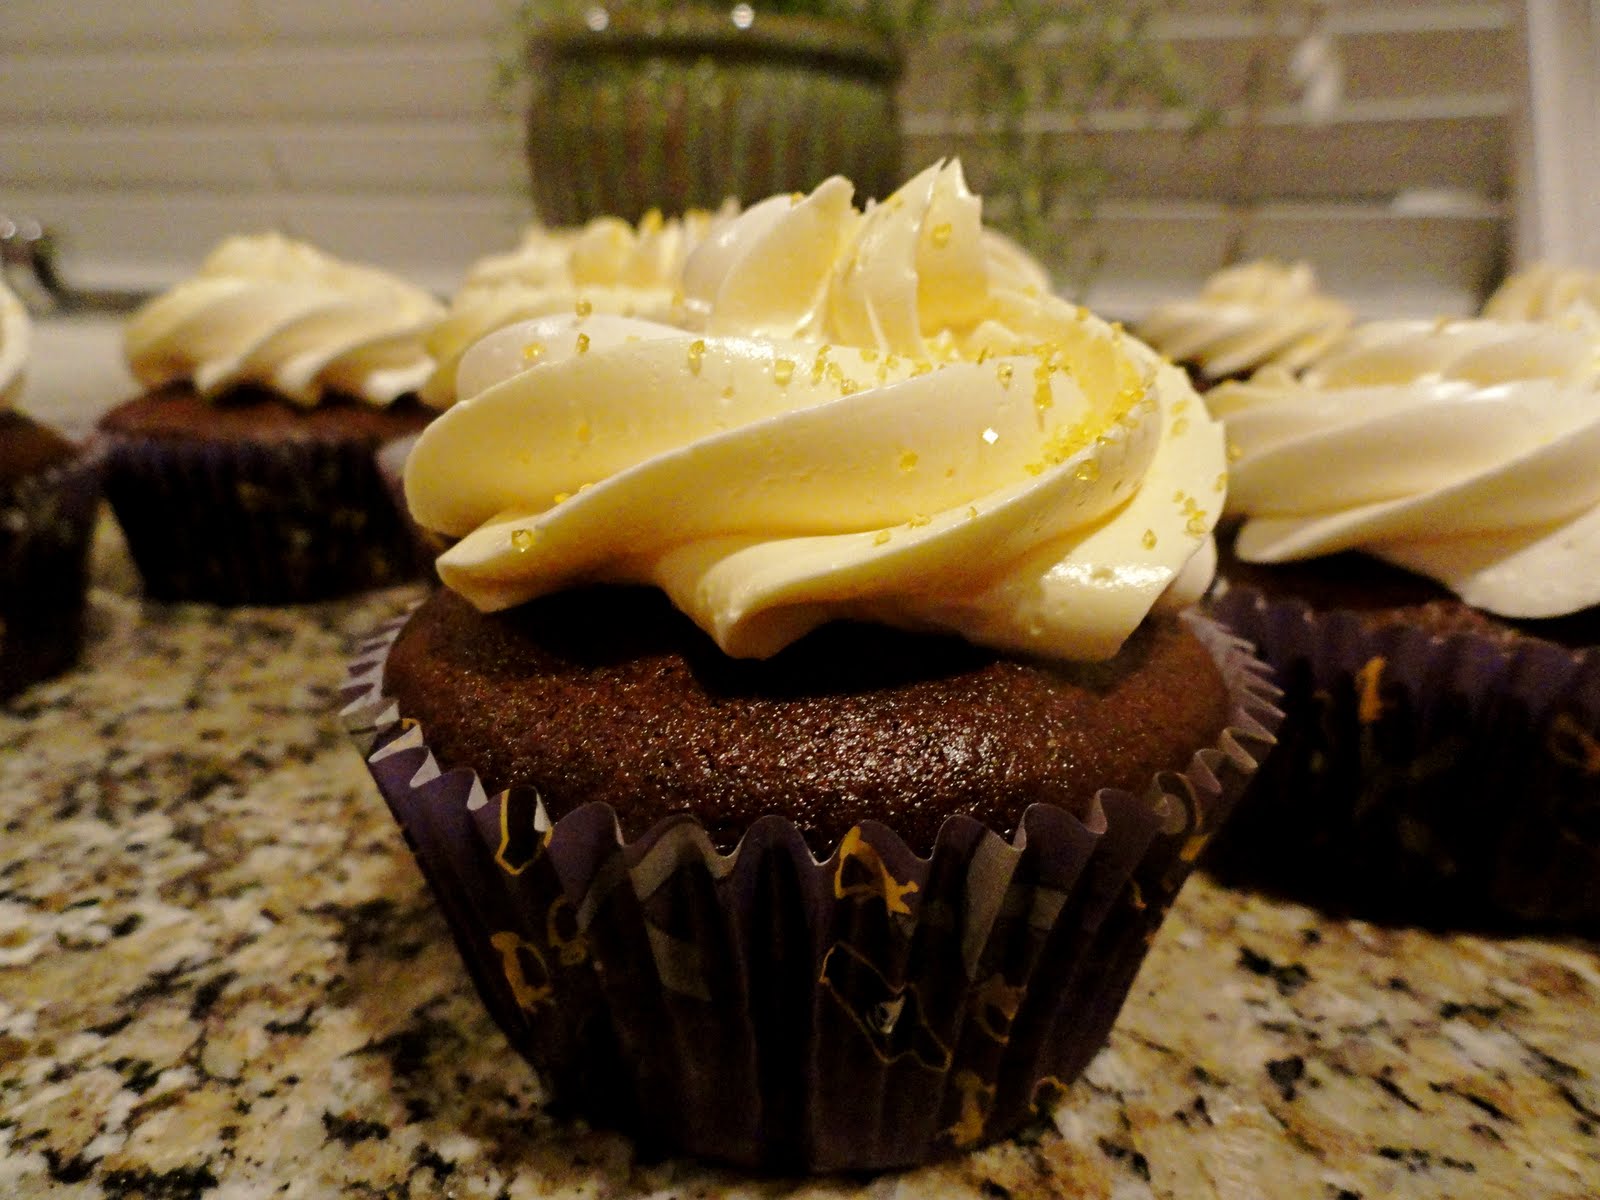 Yellow Cupcakes with Buttercream Frosting